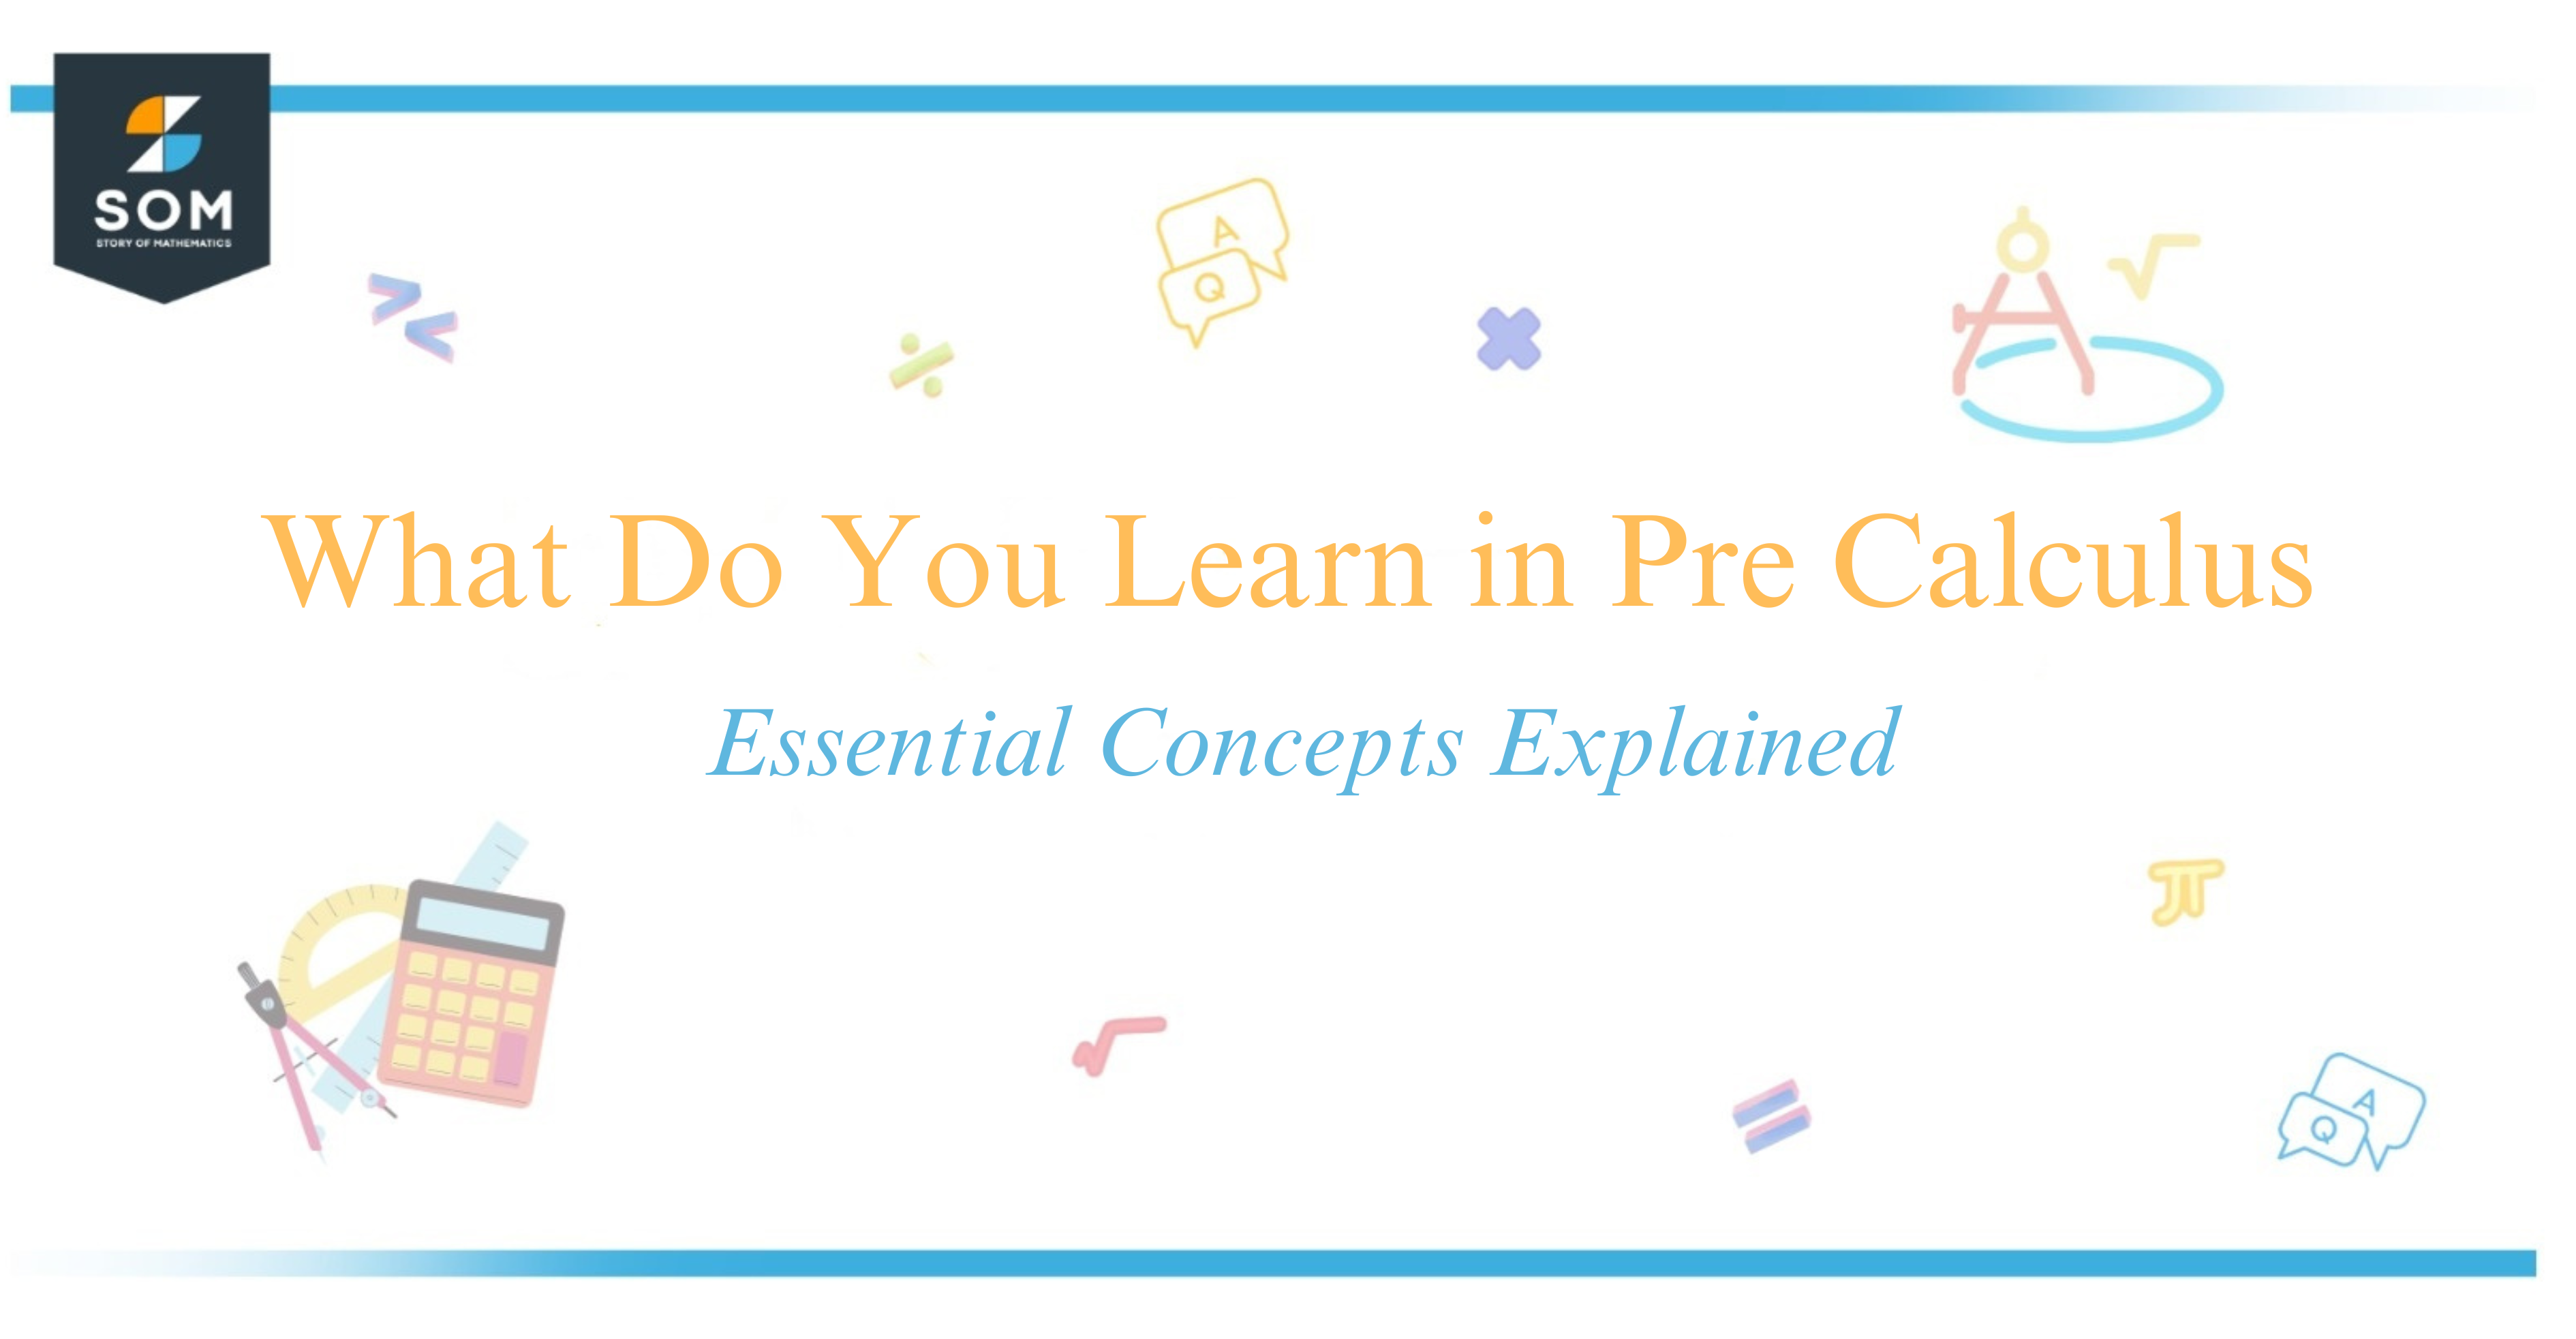 What Do You Learn in Pre Calculus Essential Concepts Explained